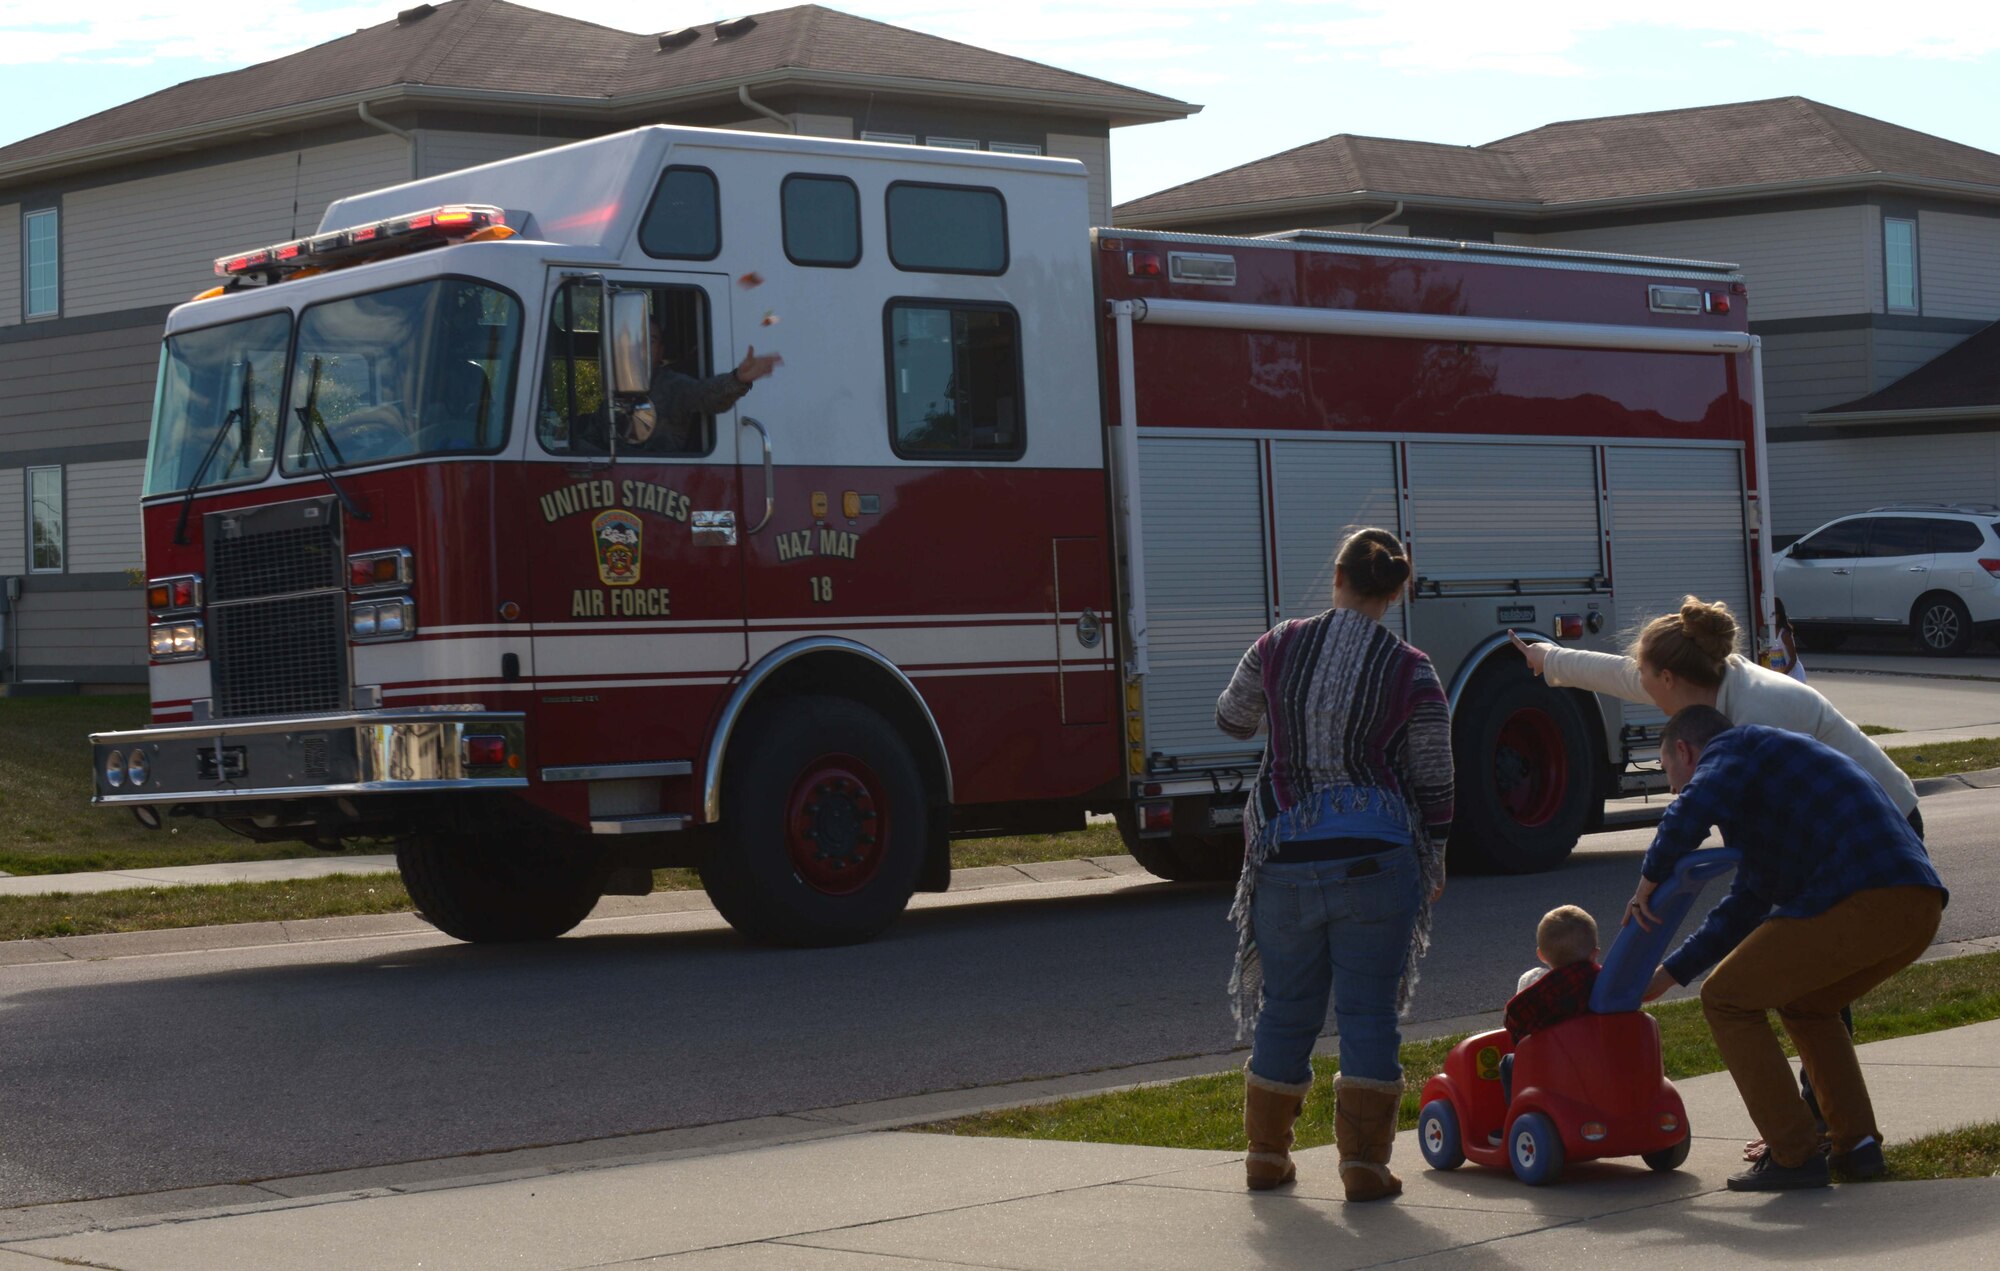 Families watch as trucks from the Ellsworth Fire Department drive through base housing during the Fire Prevention Week parade at Ellsworth Air Force Base, S.D., Oct. 8, 2016. The goal of the parade was to bring awareness to Fire Prevention Week and promote the importance of fire safety for all base personnel and their families. (U.S. Air Force photo by Airman 1st Class Donald C. Knechtel)